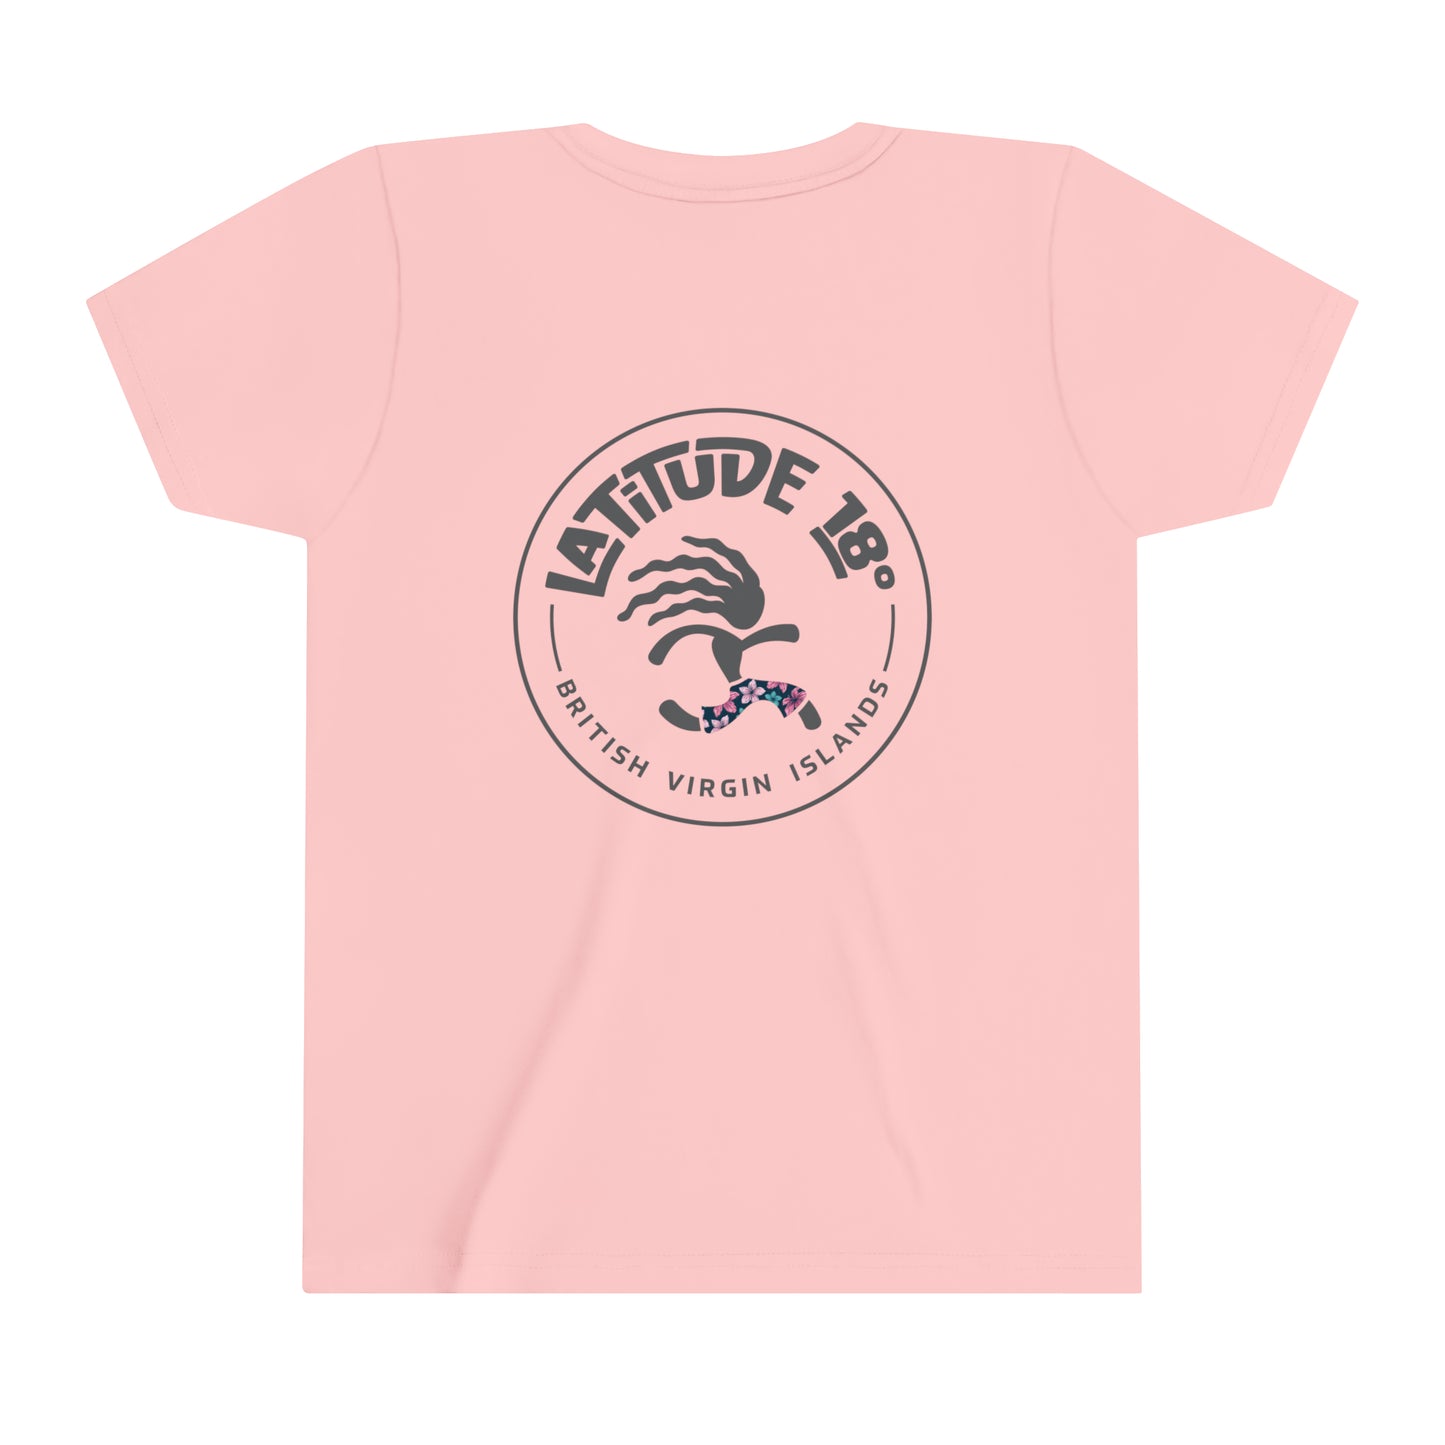 "L18º Surfer Dude" Youth S/S Tee